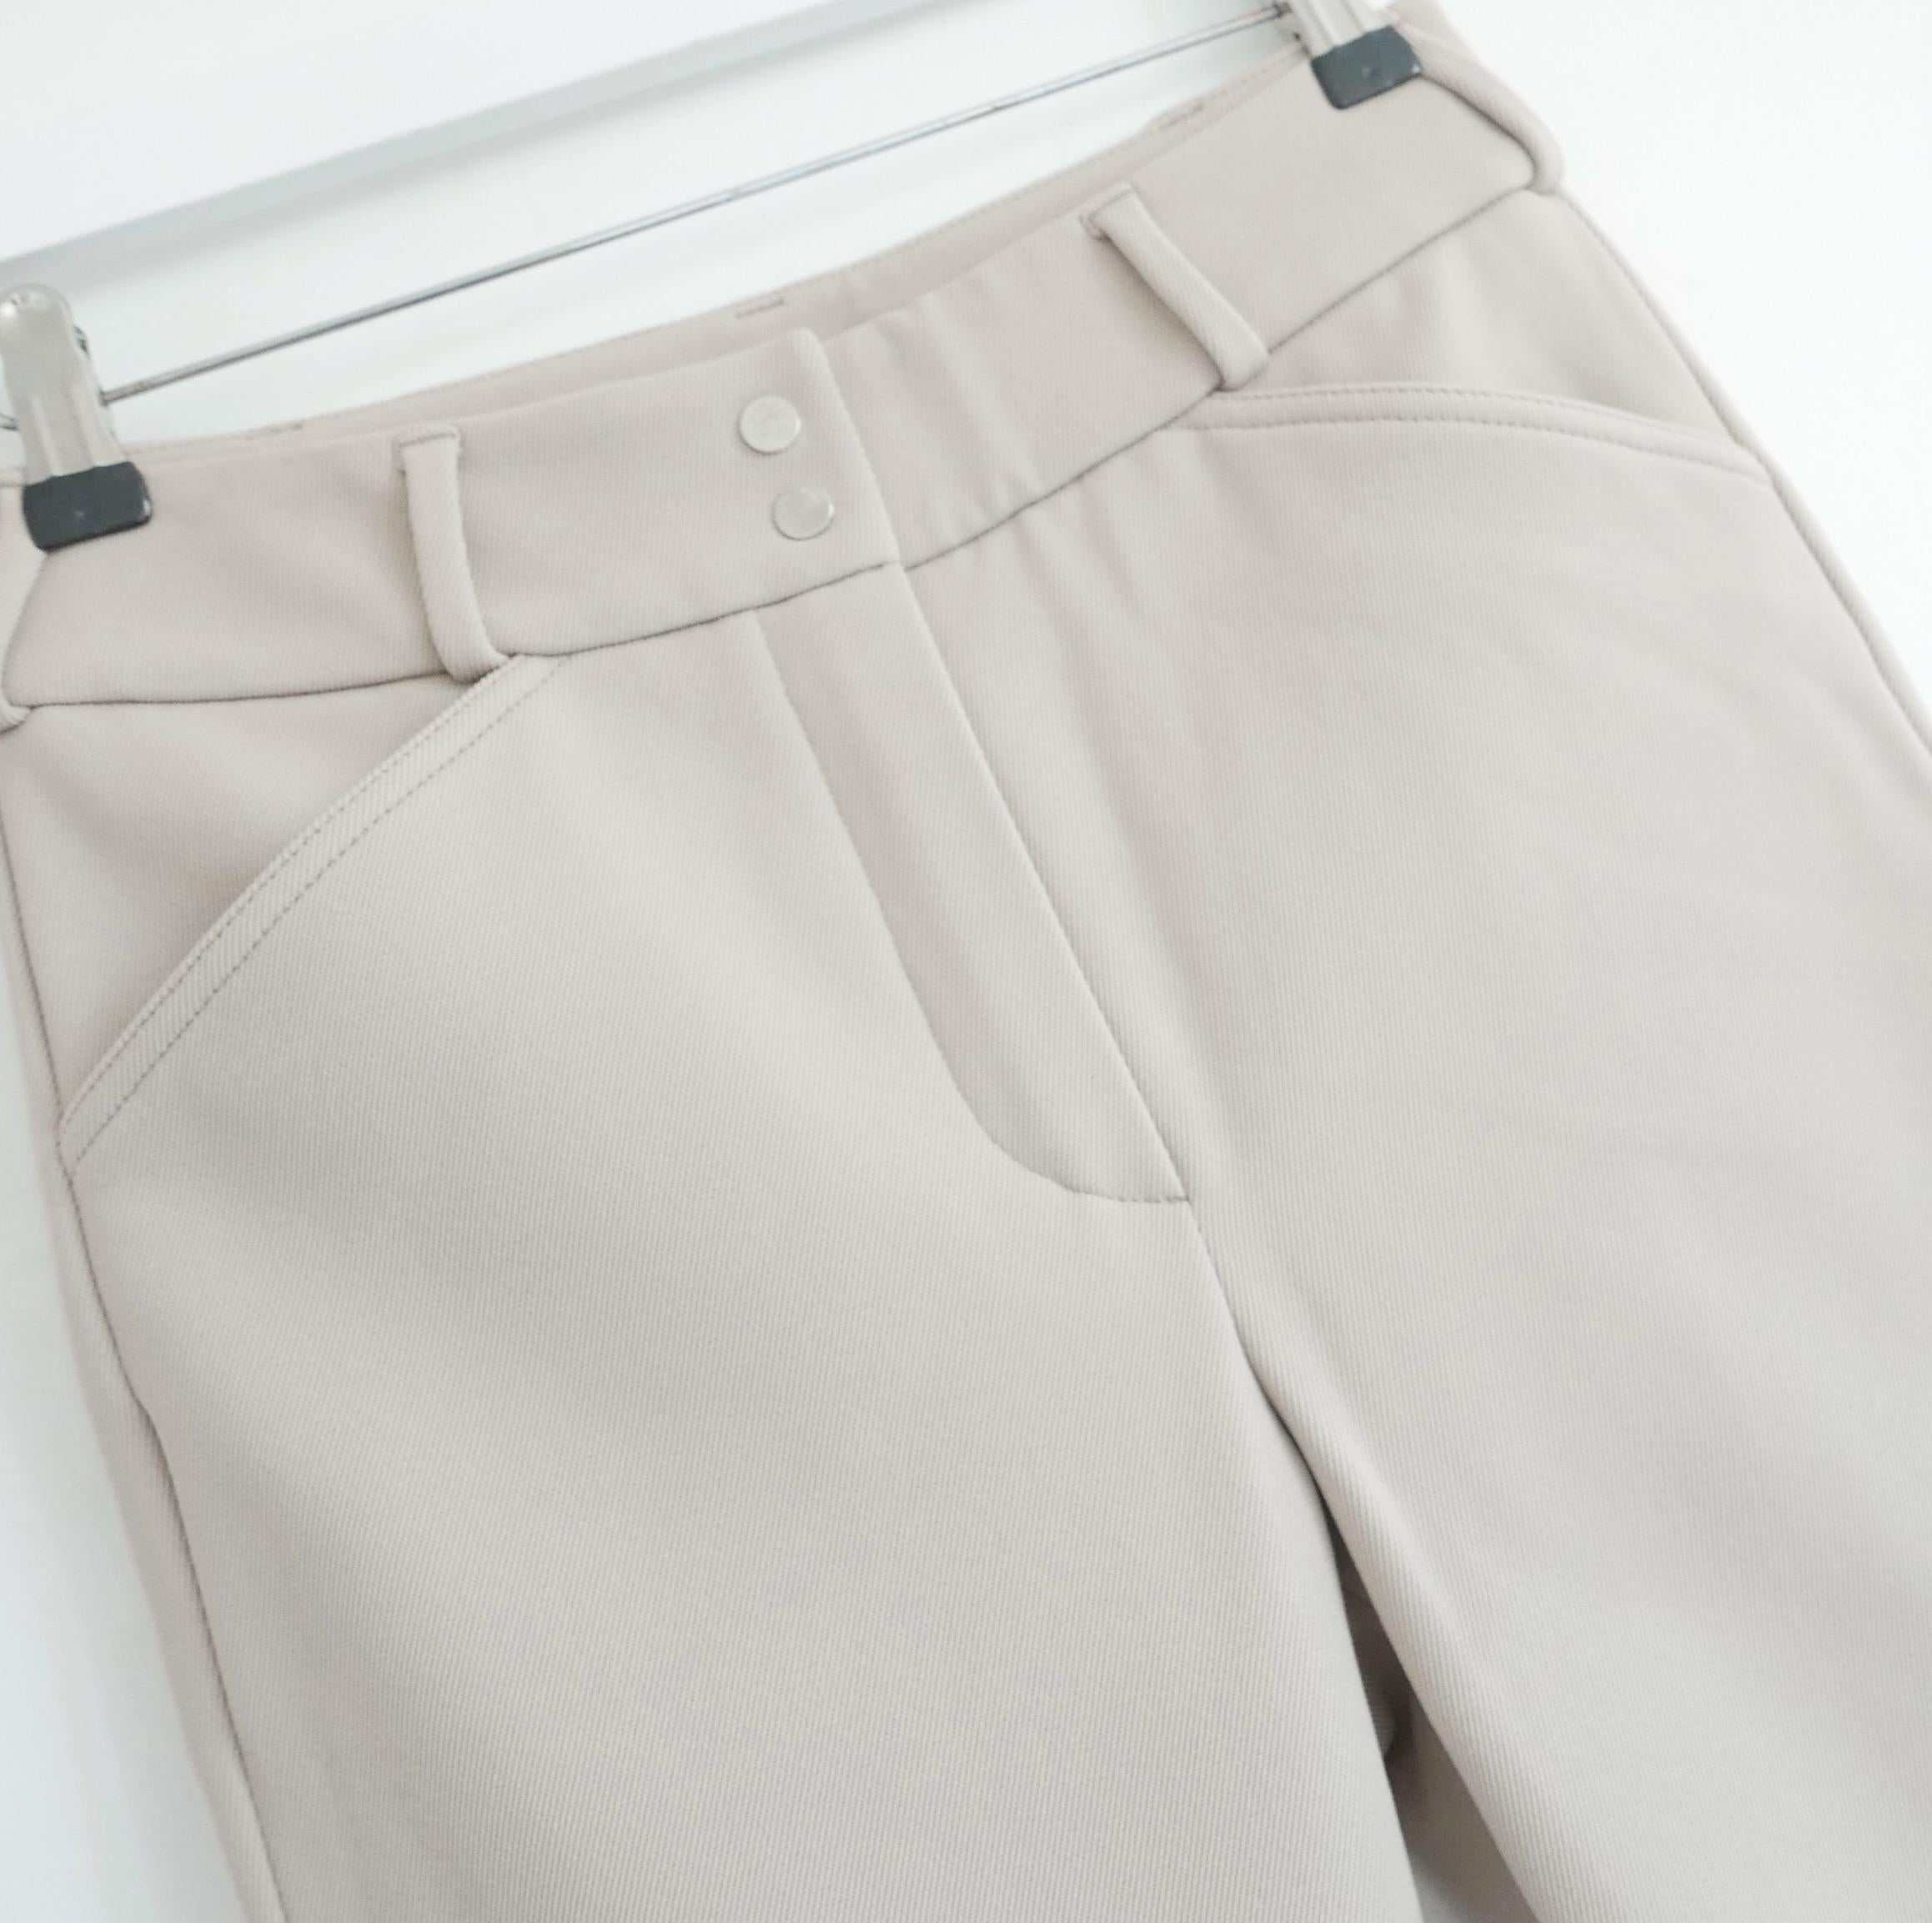 Current model Loro Piana Lucien trousers. bought for £895 and new with tag. Made from beige mid weight ribbed polyamide and wool with a super soft and warm brushed inner. They have slim legs with tapered, ankle length hems (designer to me perfect